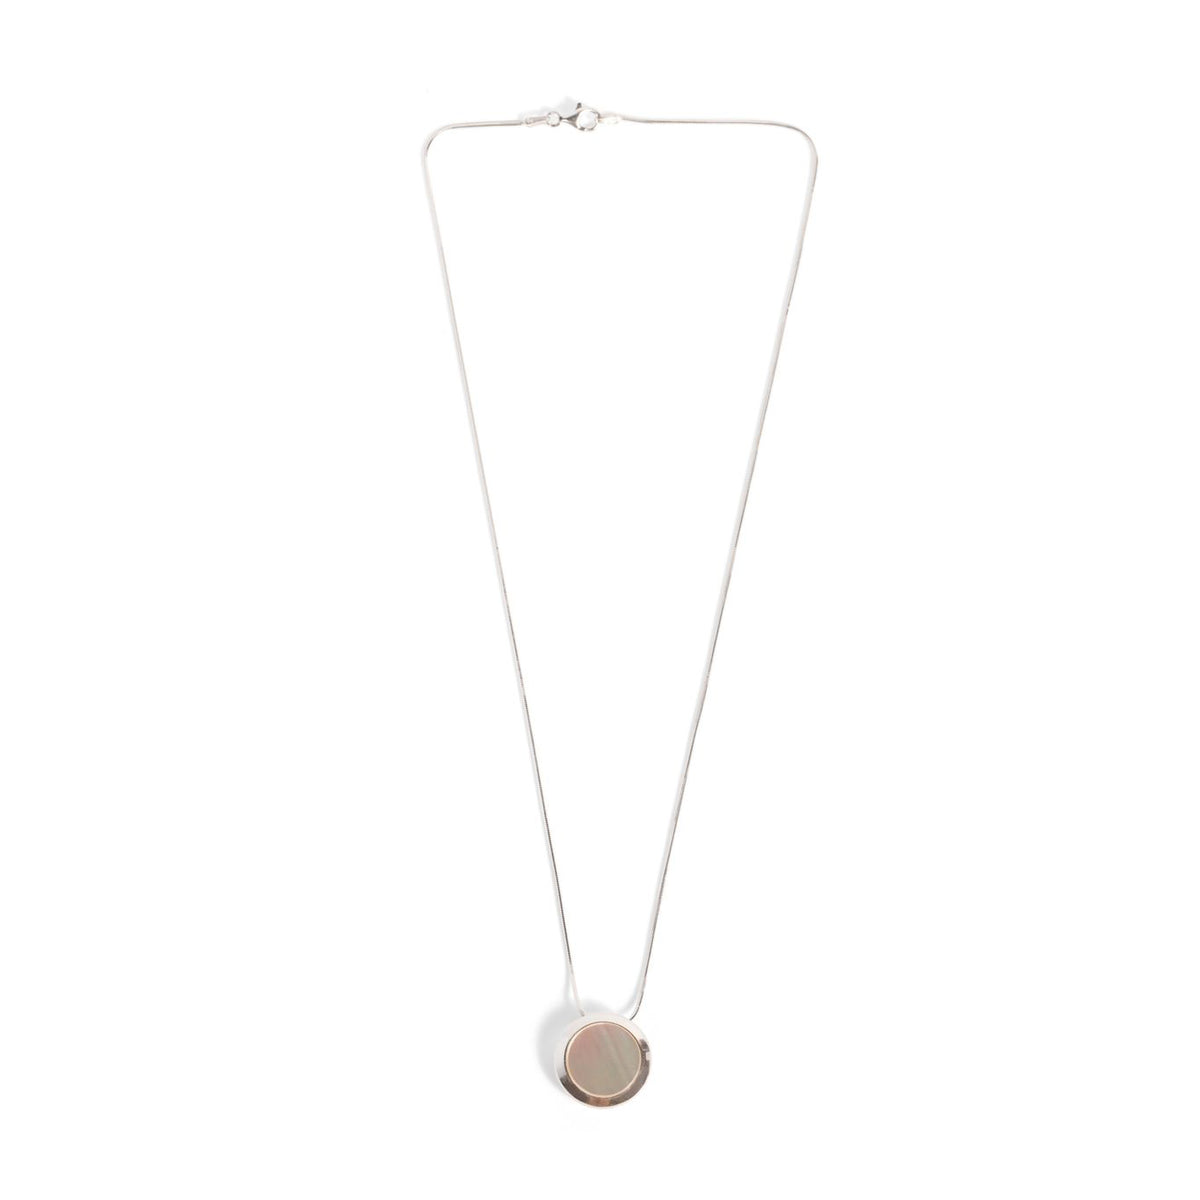 Mother-of-Pearl Round Tile Pendant Necklace